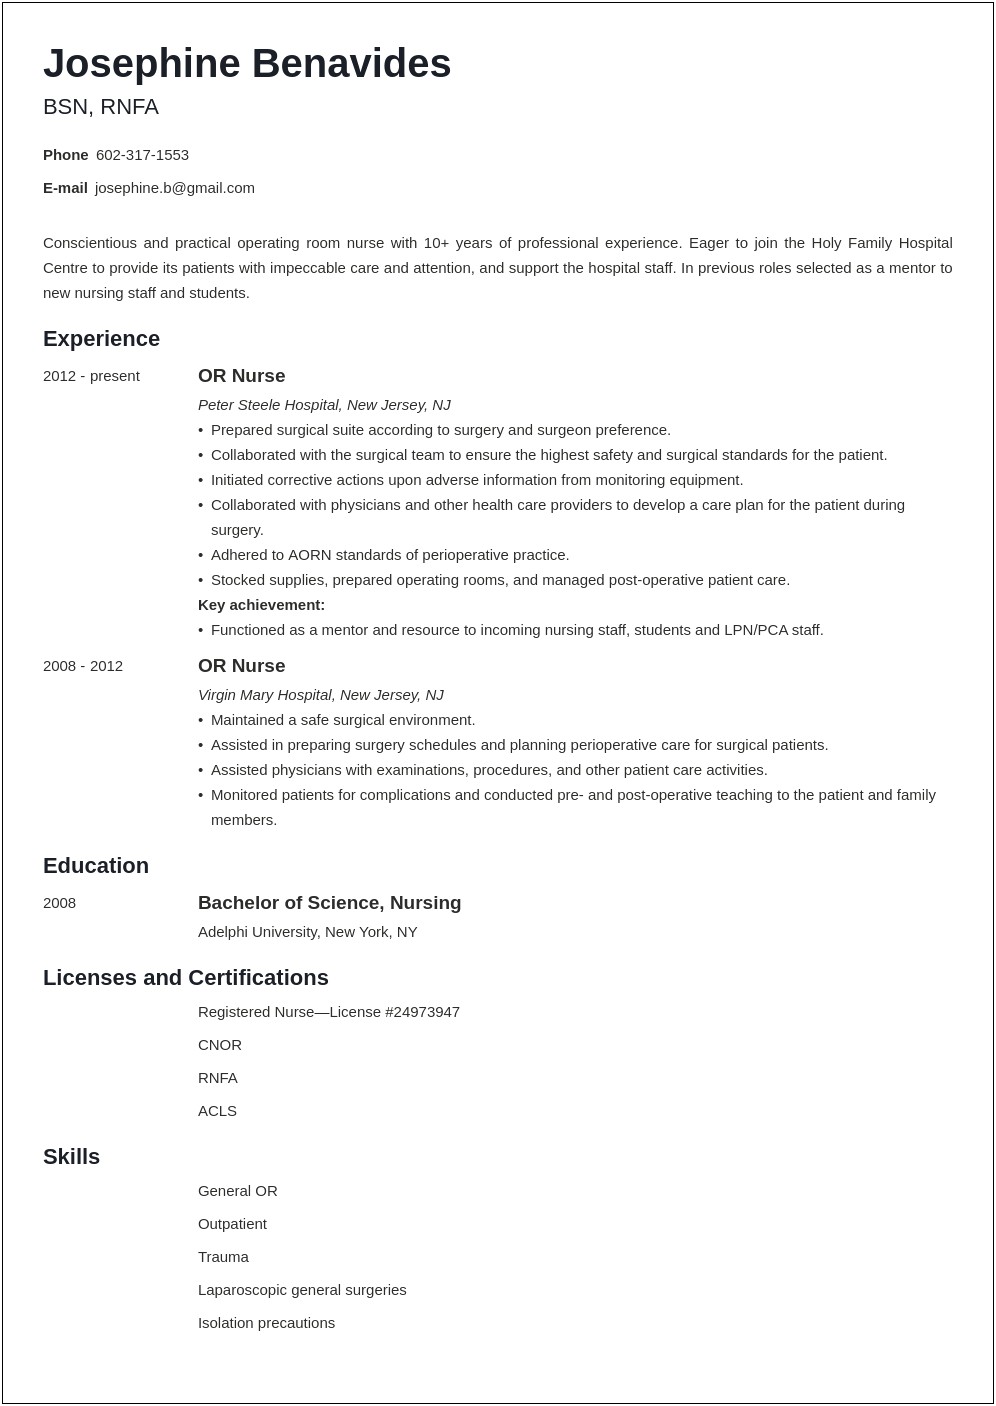 Resume For Company Nurse Without Experience